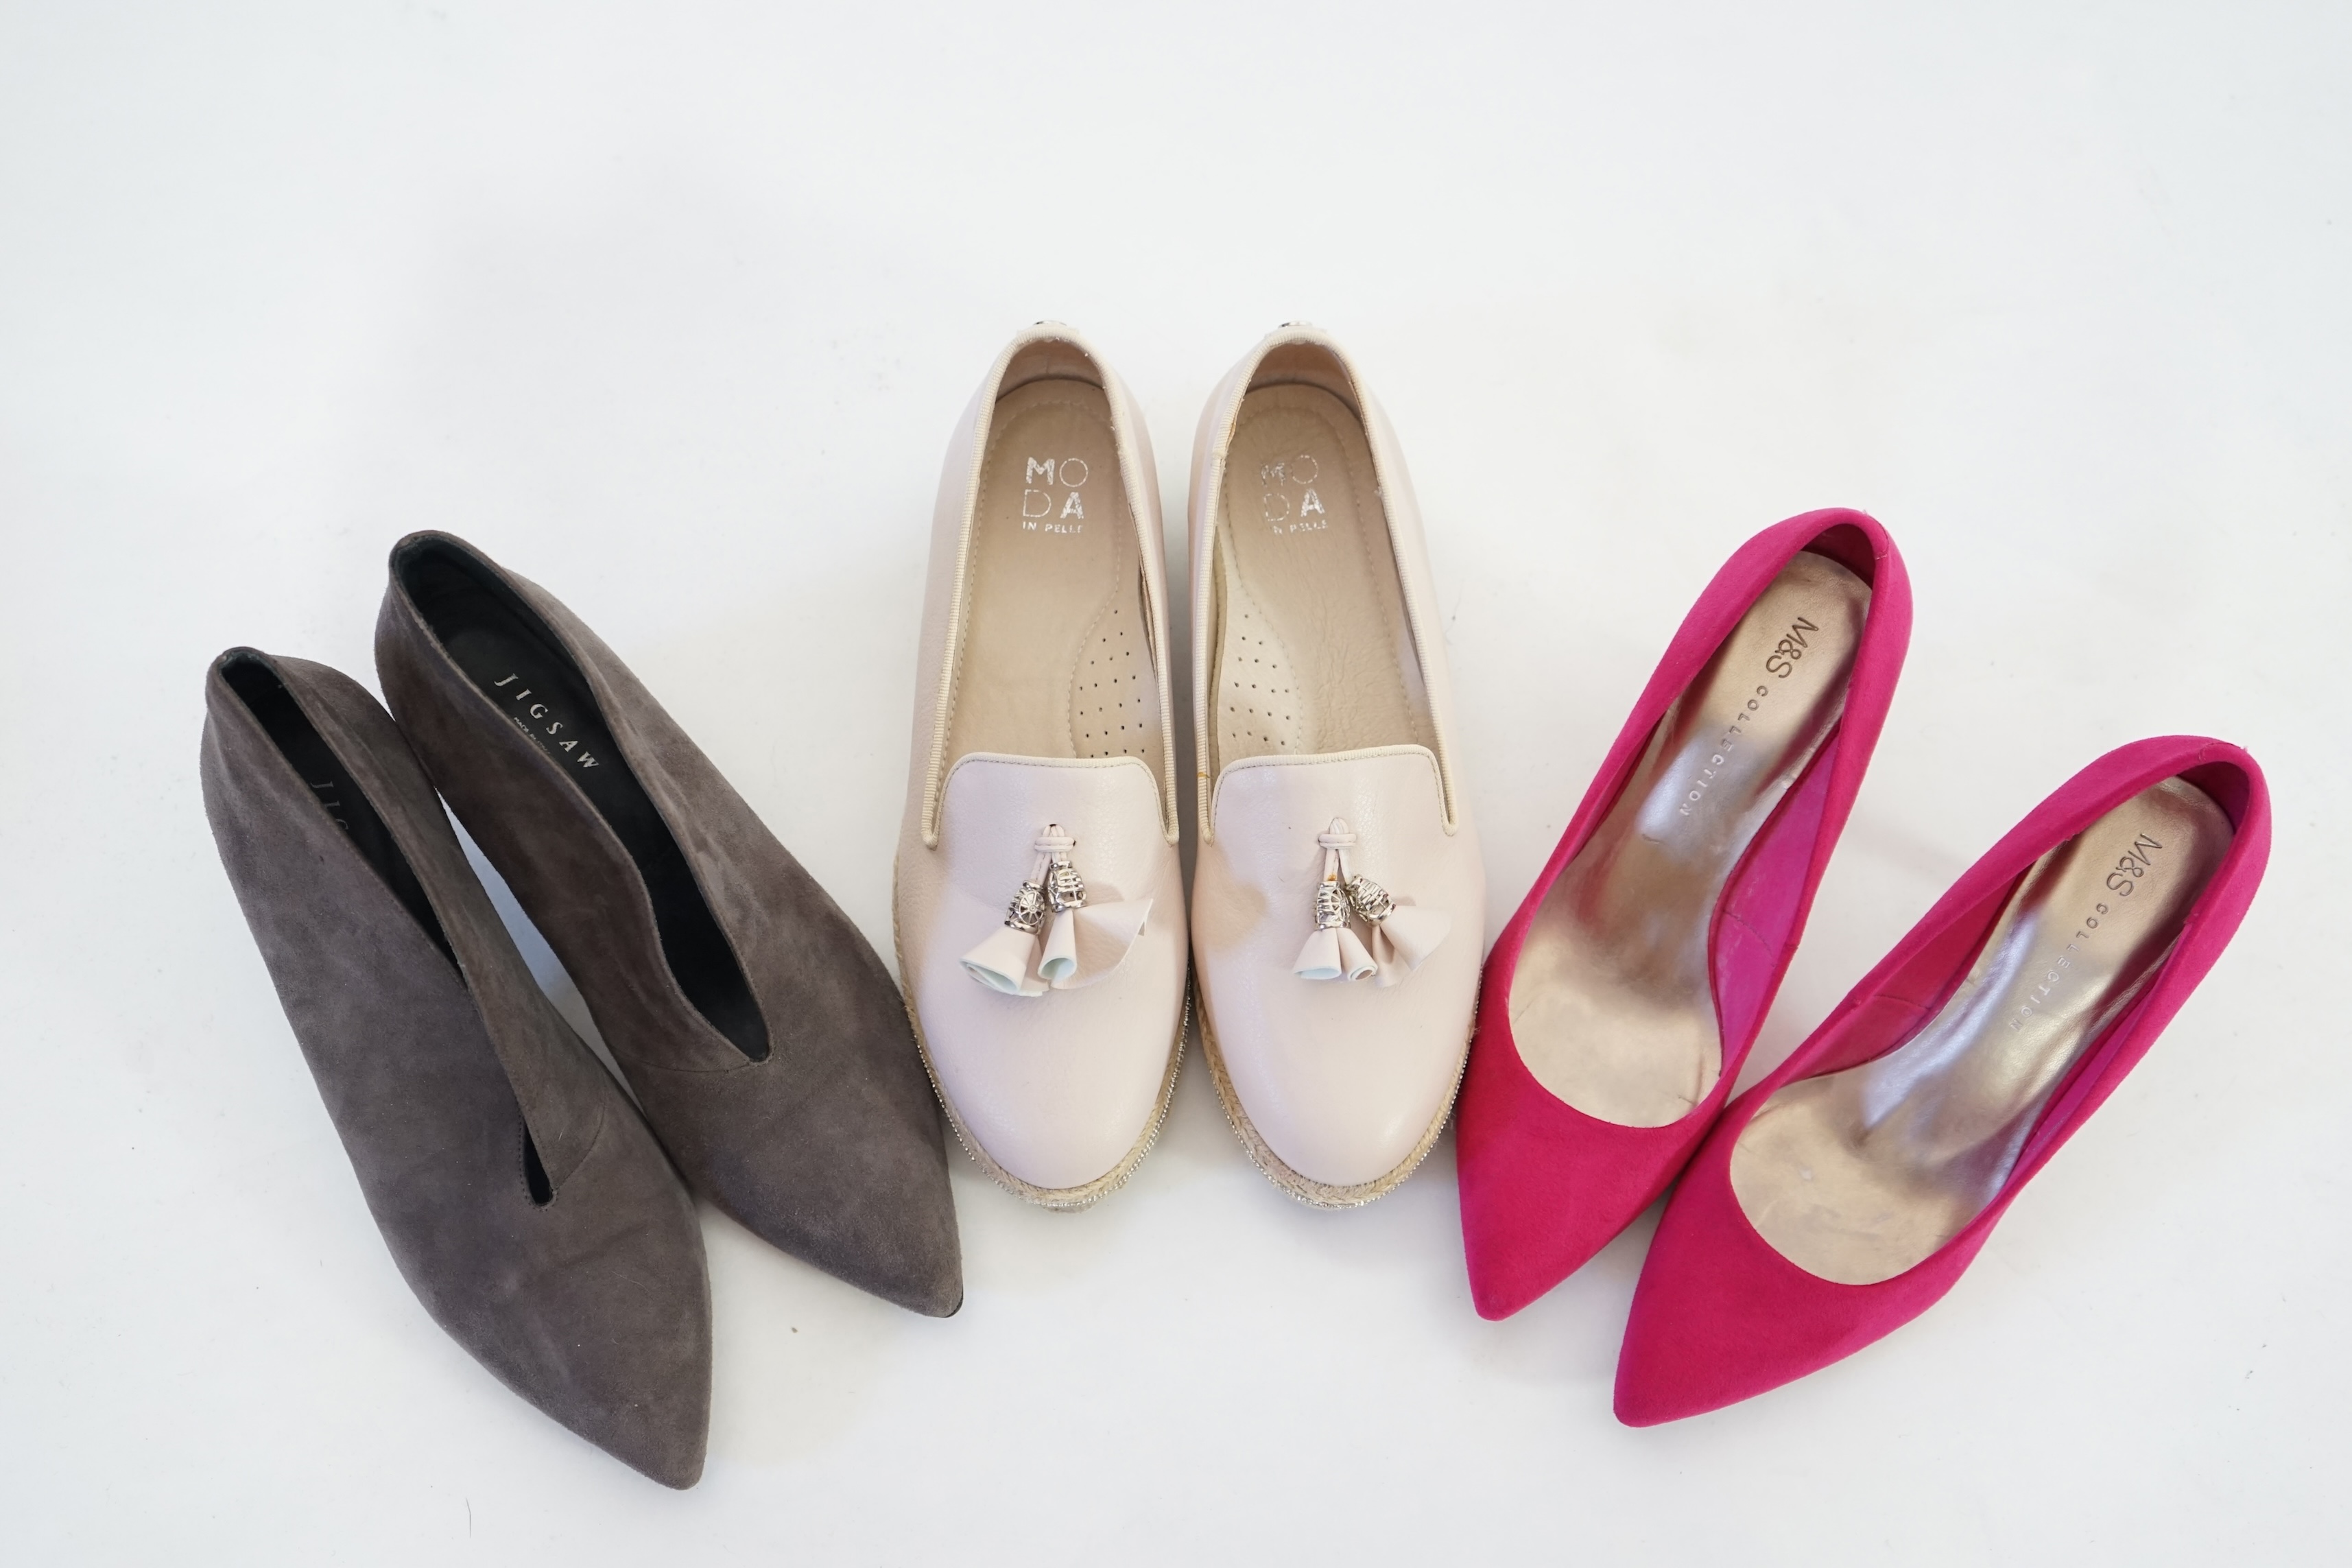 Three pairs of lady's shoes, Jigsaw V front shoe boot size 39, Marks & Spencer bright pink suede size 5.5 and a pair of Moda in Pelle buff platformed flats with metallic silver strip through sole. Proceeds to Happy Paws